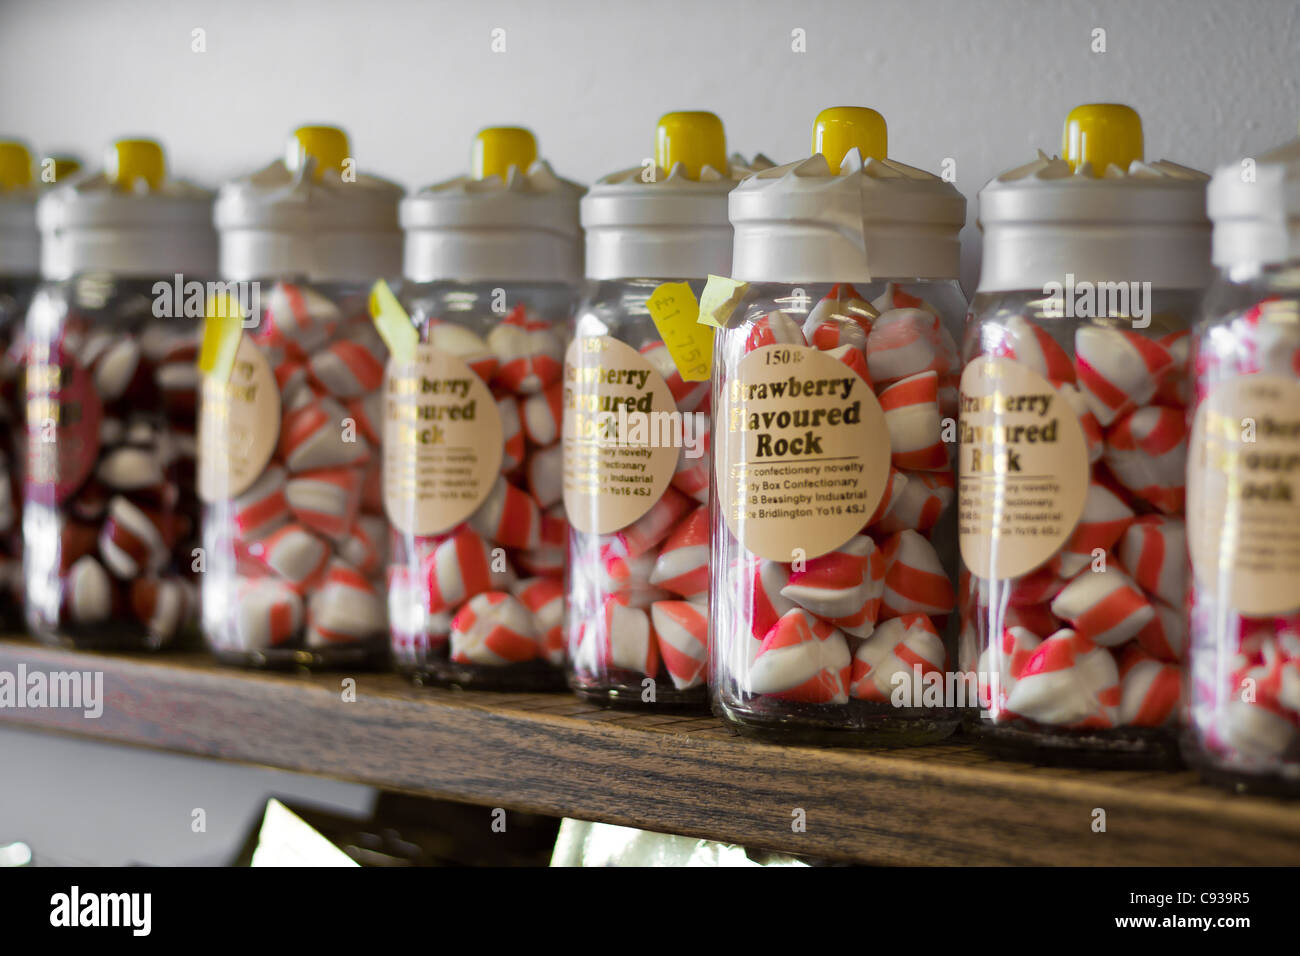 Strawberry flavoured holiday stick of rock in jars and bags of sweets for sale, the perfect holiday beach gift and present. Stock Photo